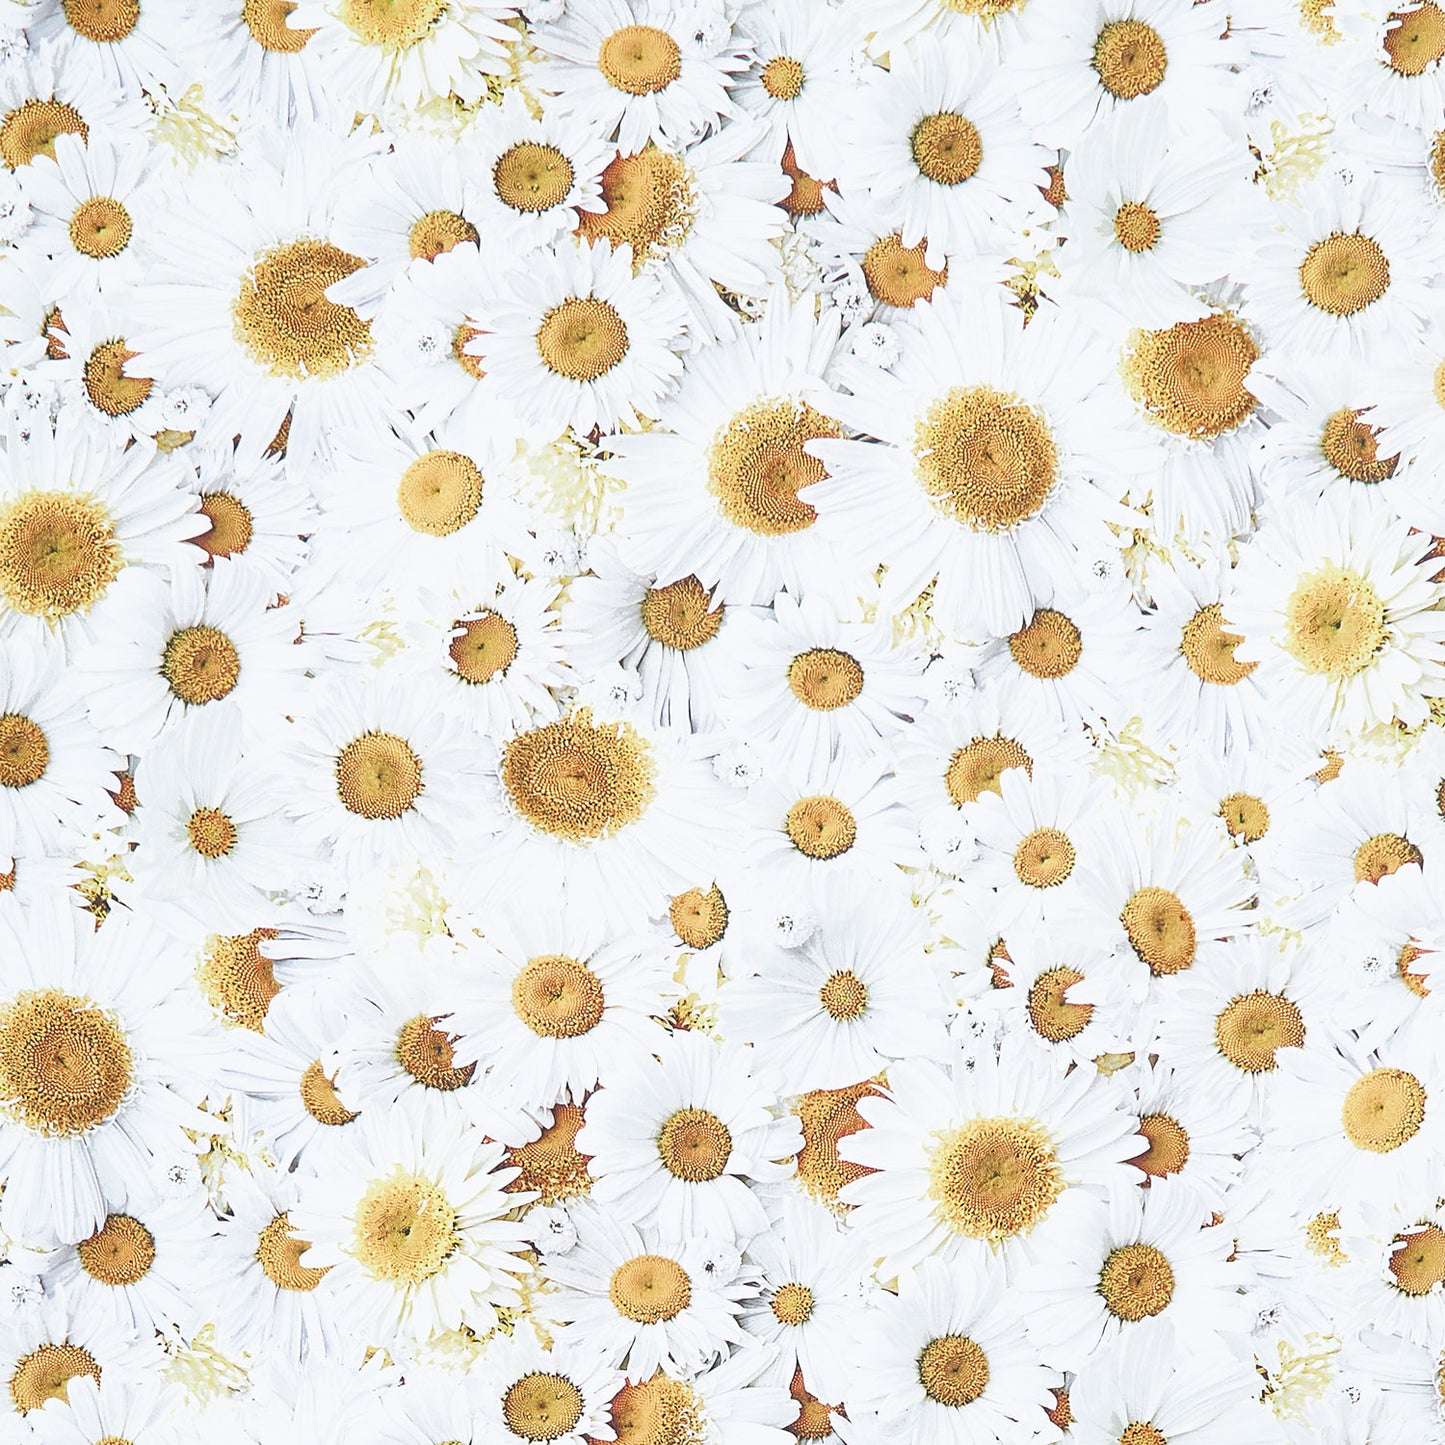 Hand Picked - Forget Me Not - Daisy Delight White Yellow108" Wide Backing Yardage Primary Image